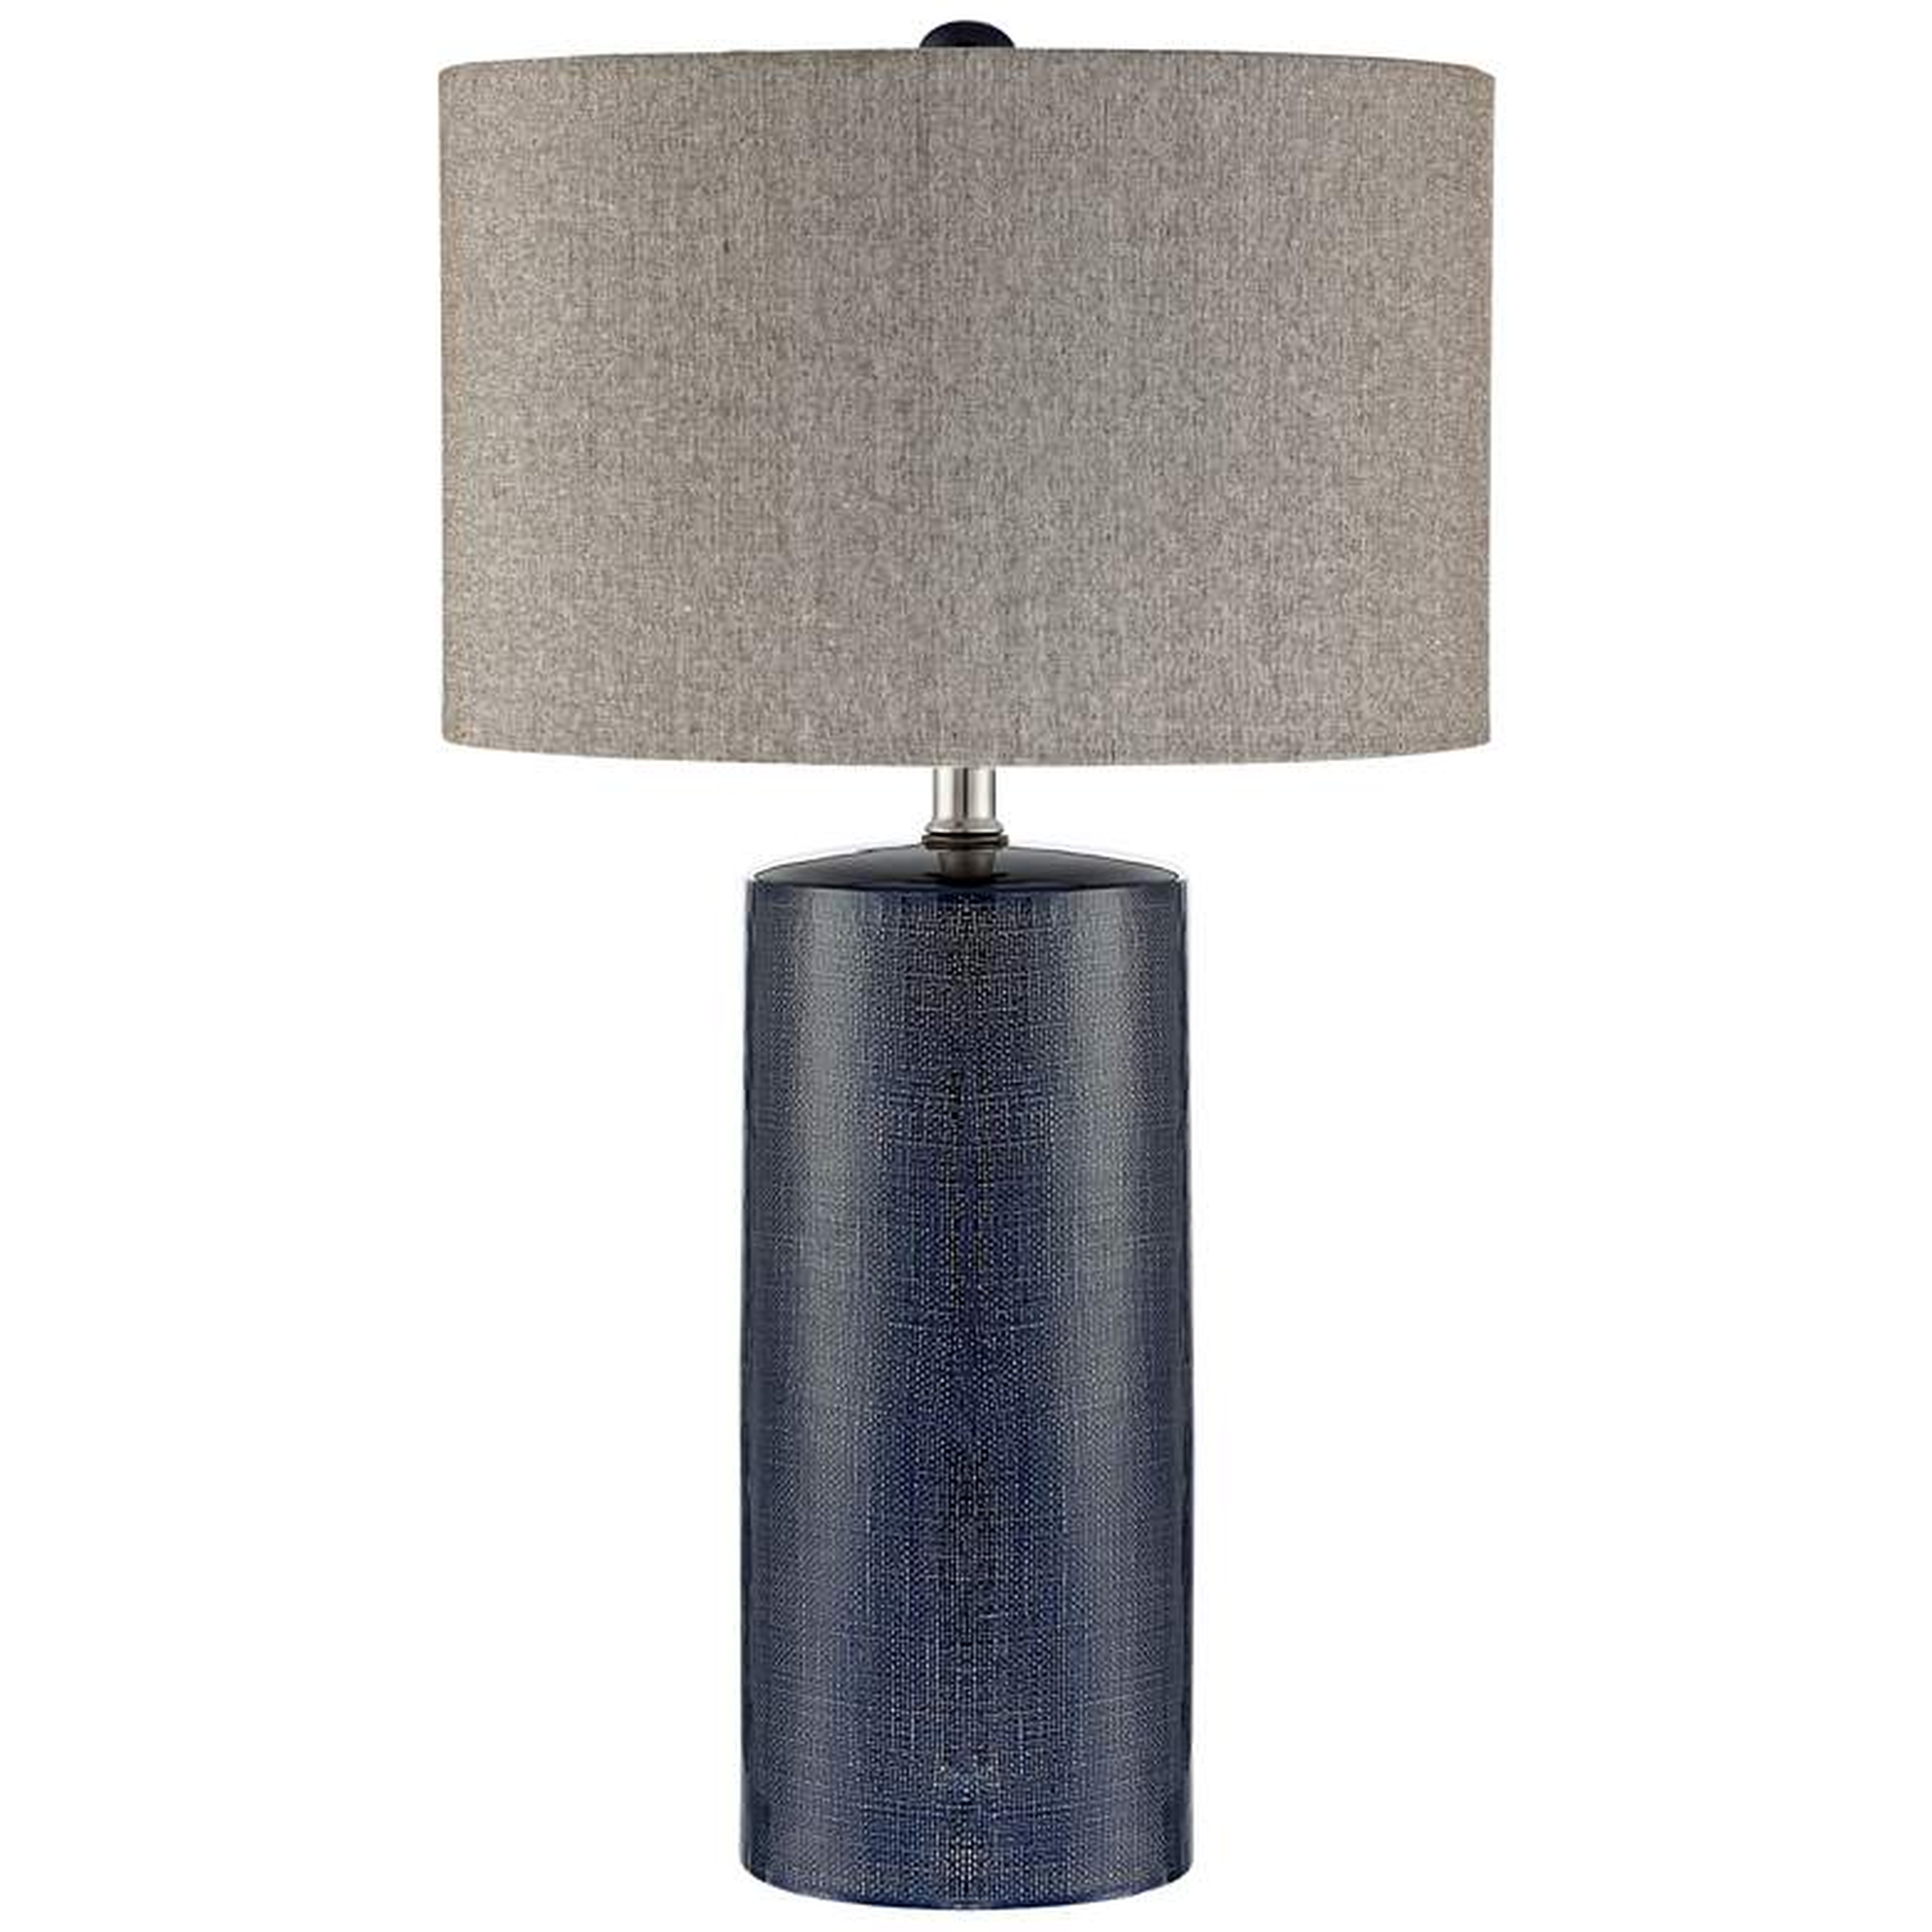 Lite Source Jacoby Navy Blue Ceramic Table Lamp - Style # 33T79 - Lamps Plus